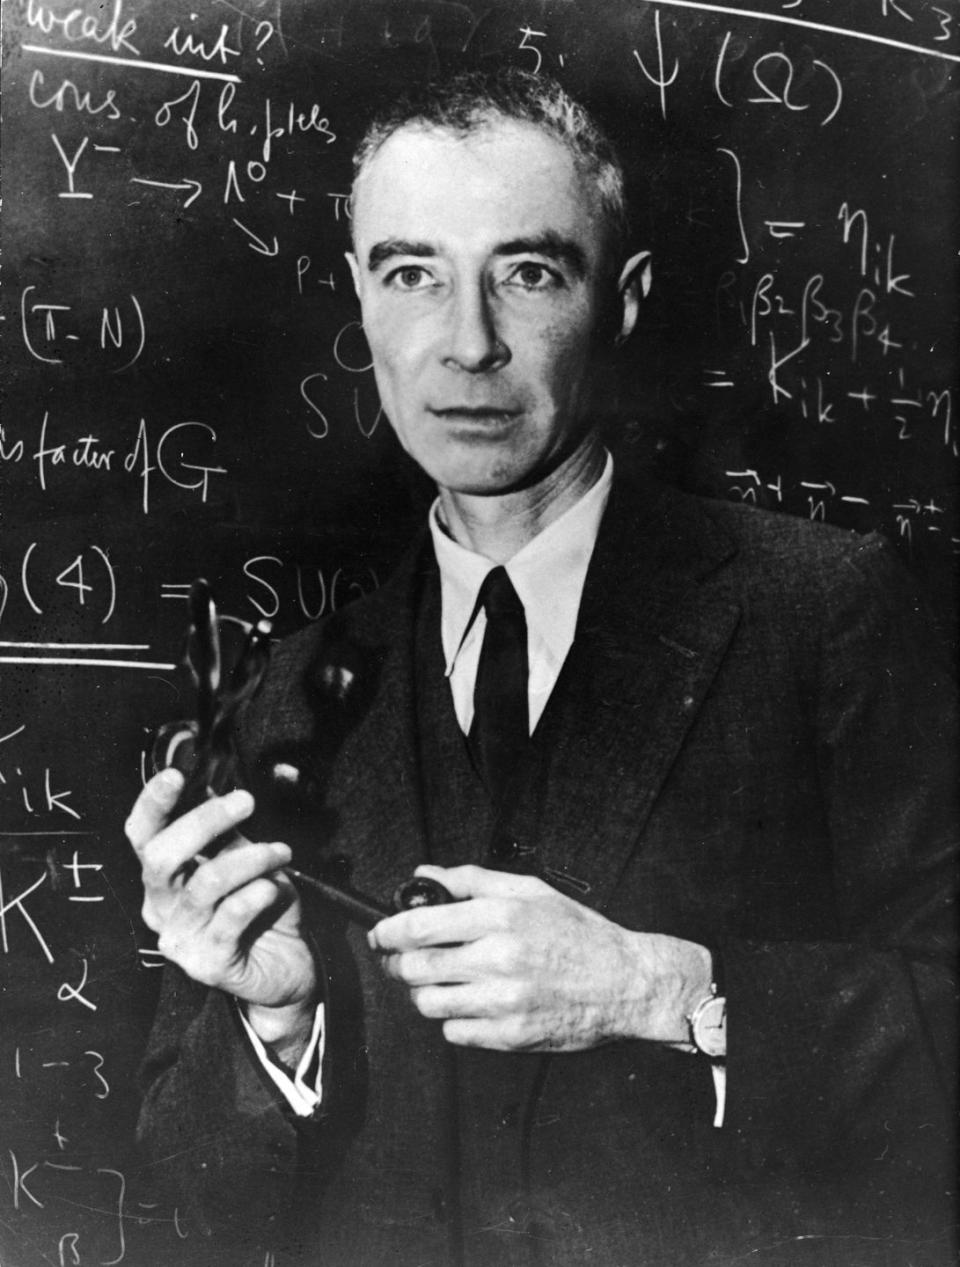 j robert oppenheimer wears a suit and tie and stands in front of a chalkboard with scientific problems written on it